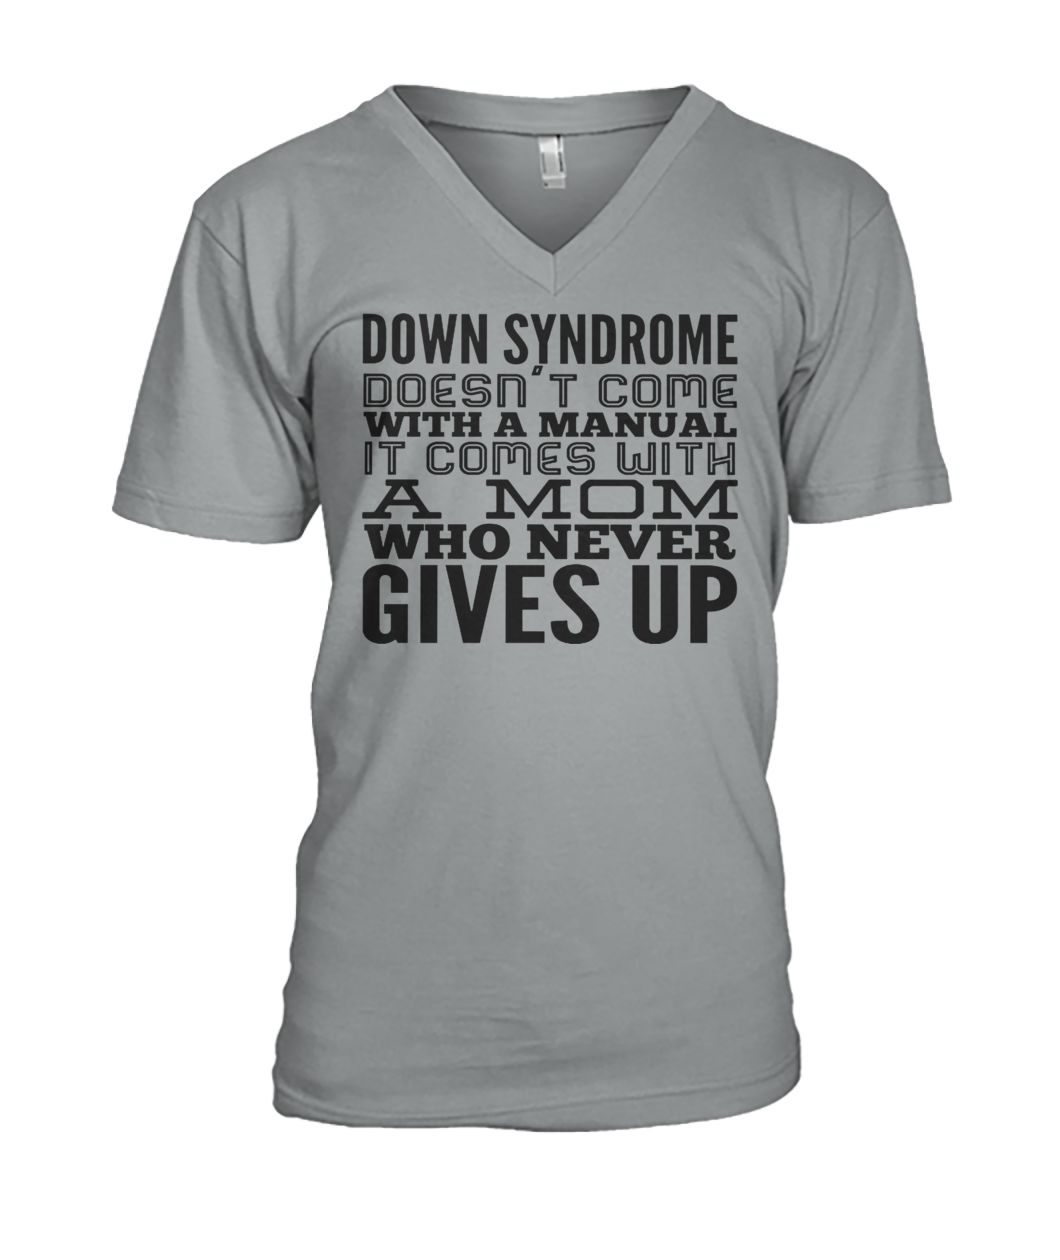 Down syndrome doesn't come with a manual mens v-neck